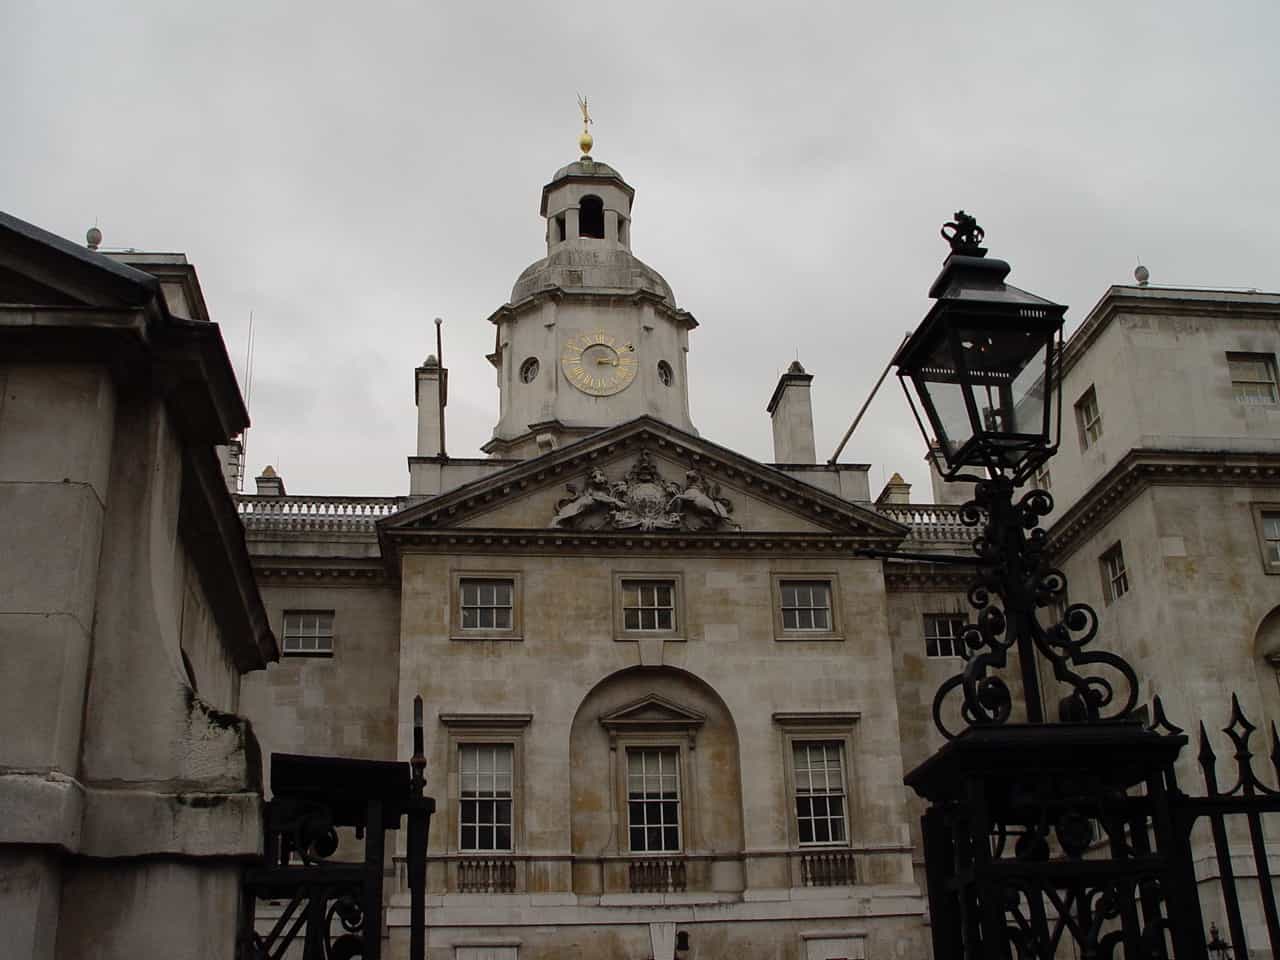 Horse Guards building in Westminster, London, England